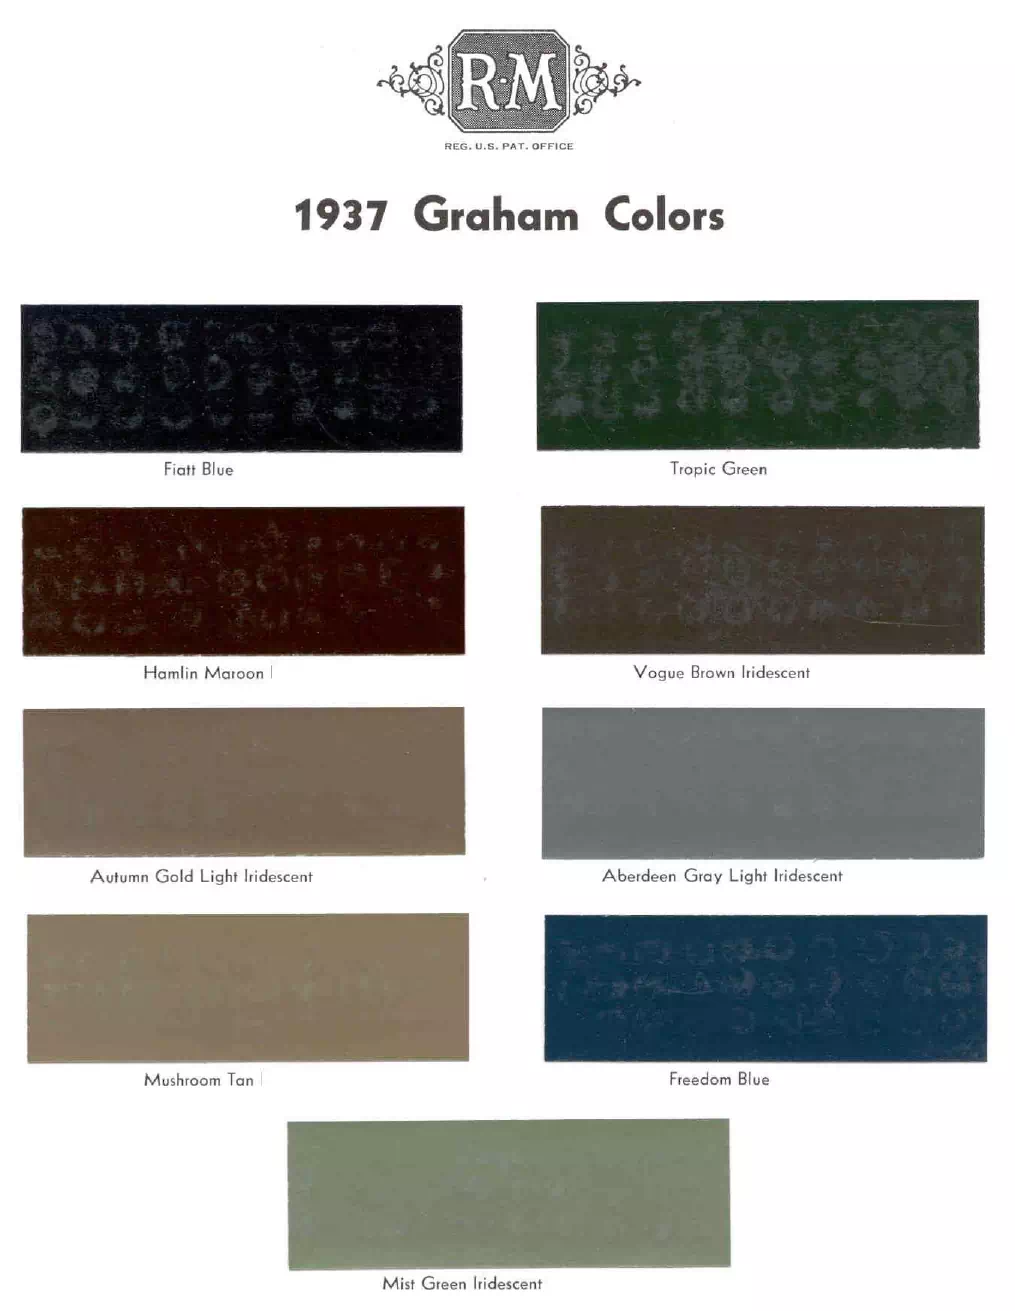 colors and ordering codes for those colors used on 1937 vehicles